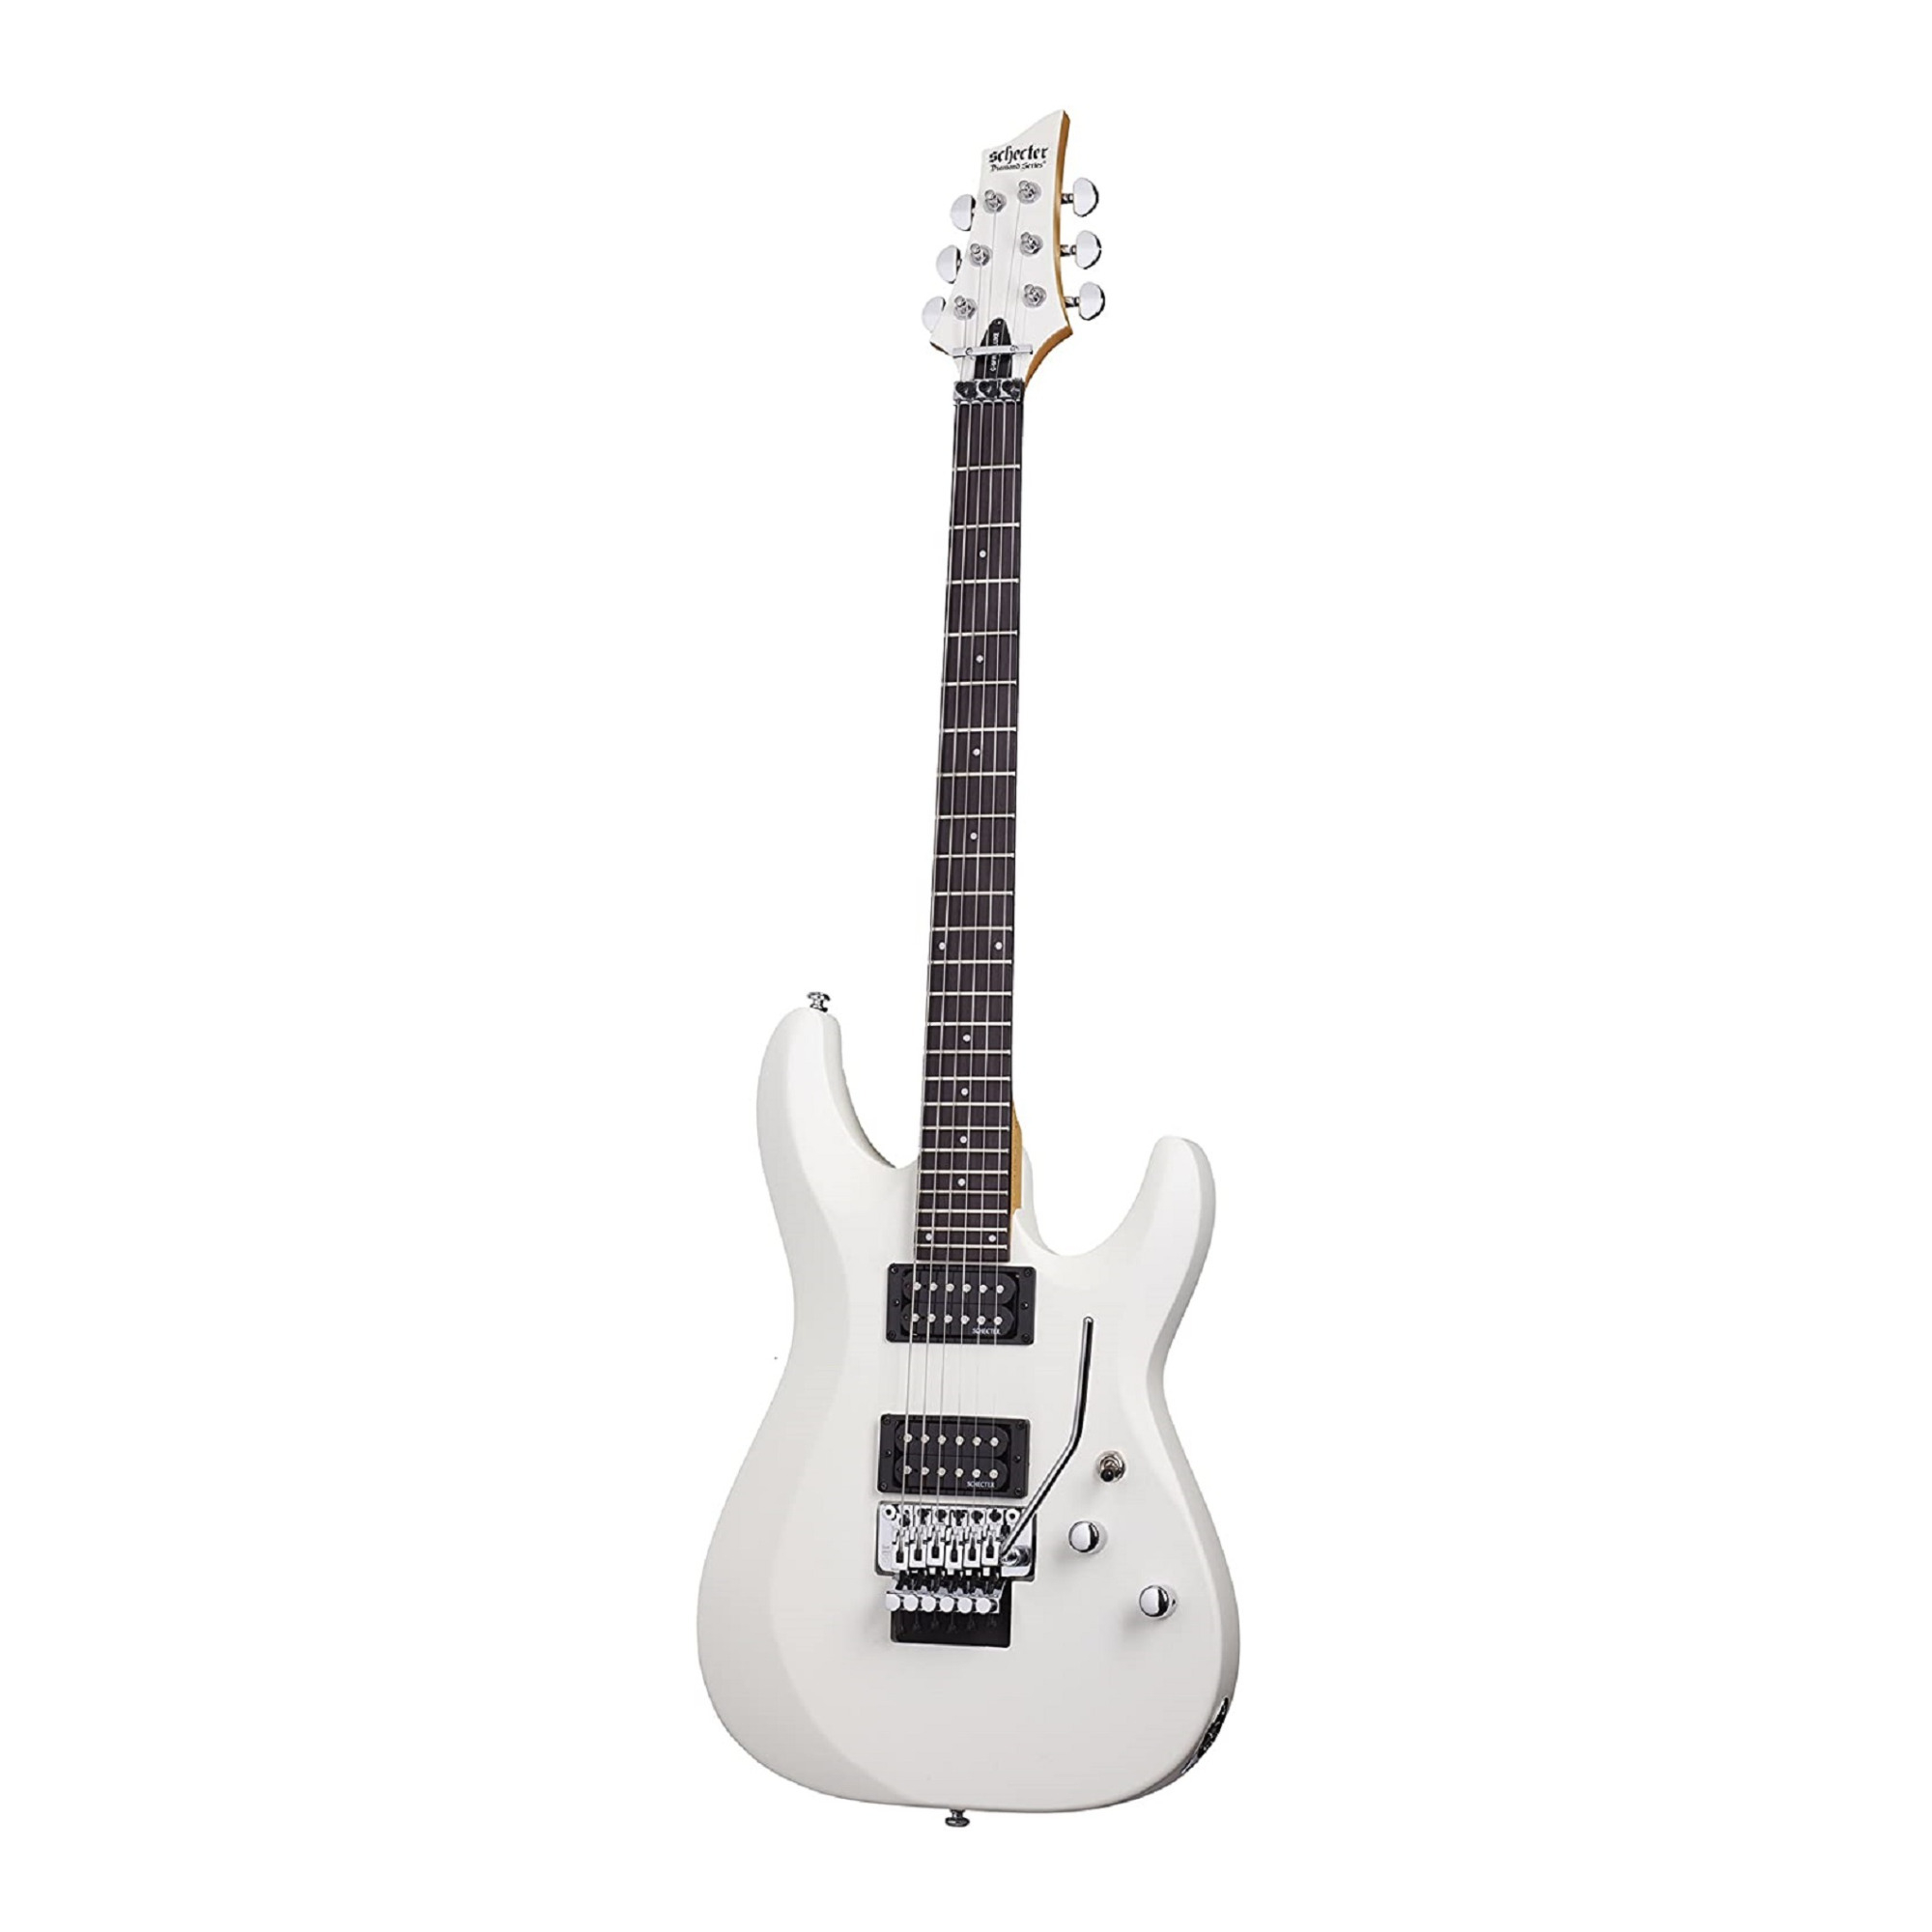 Schecter C-6FR Deluxe 6-String Electric Guitar (Right-Hand, Satin White) -  435